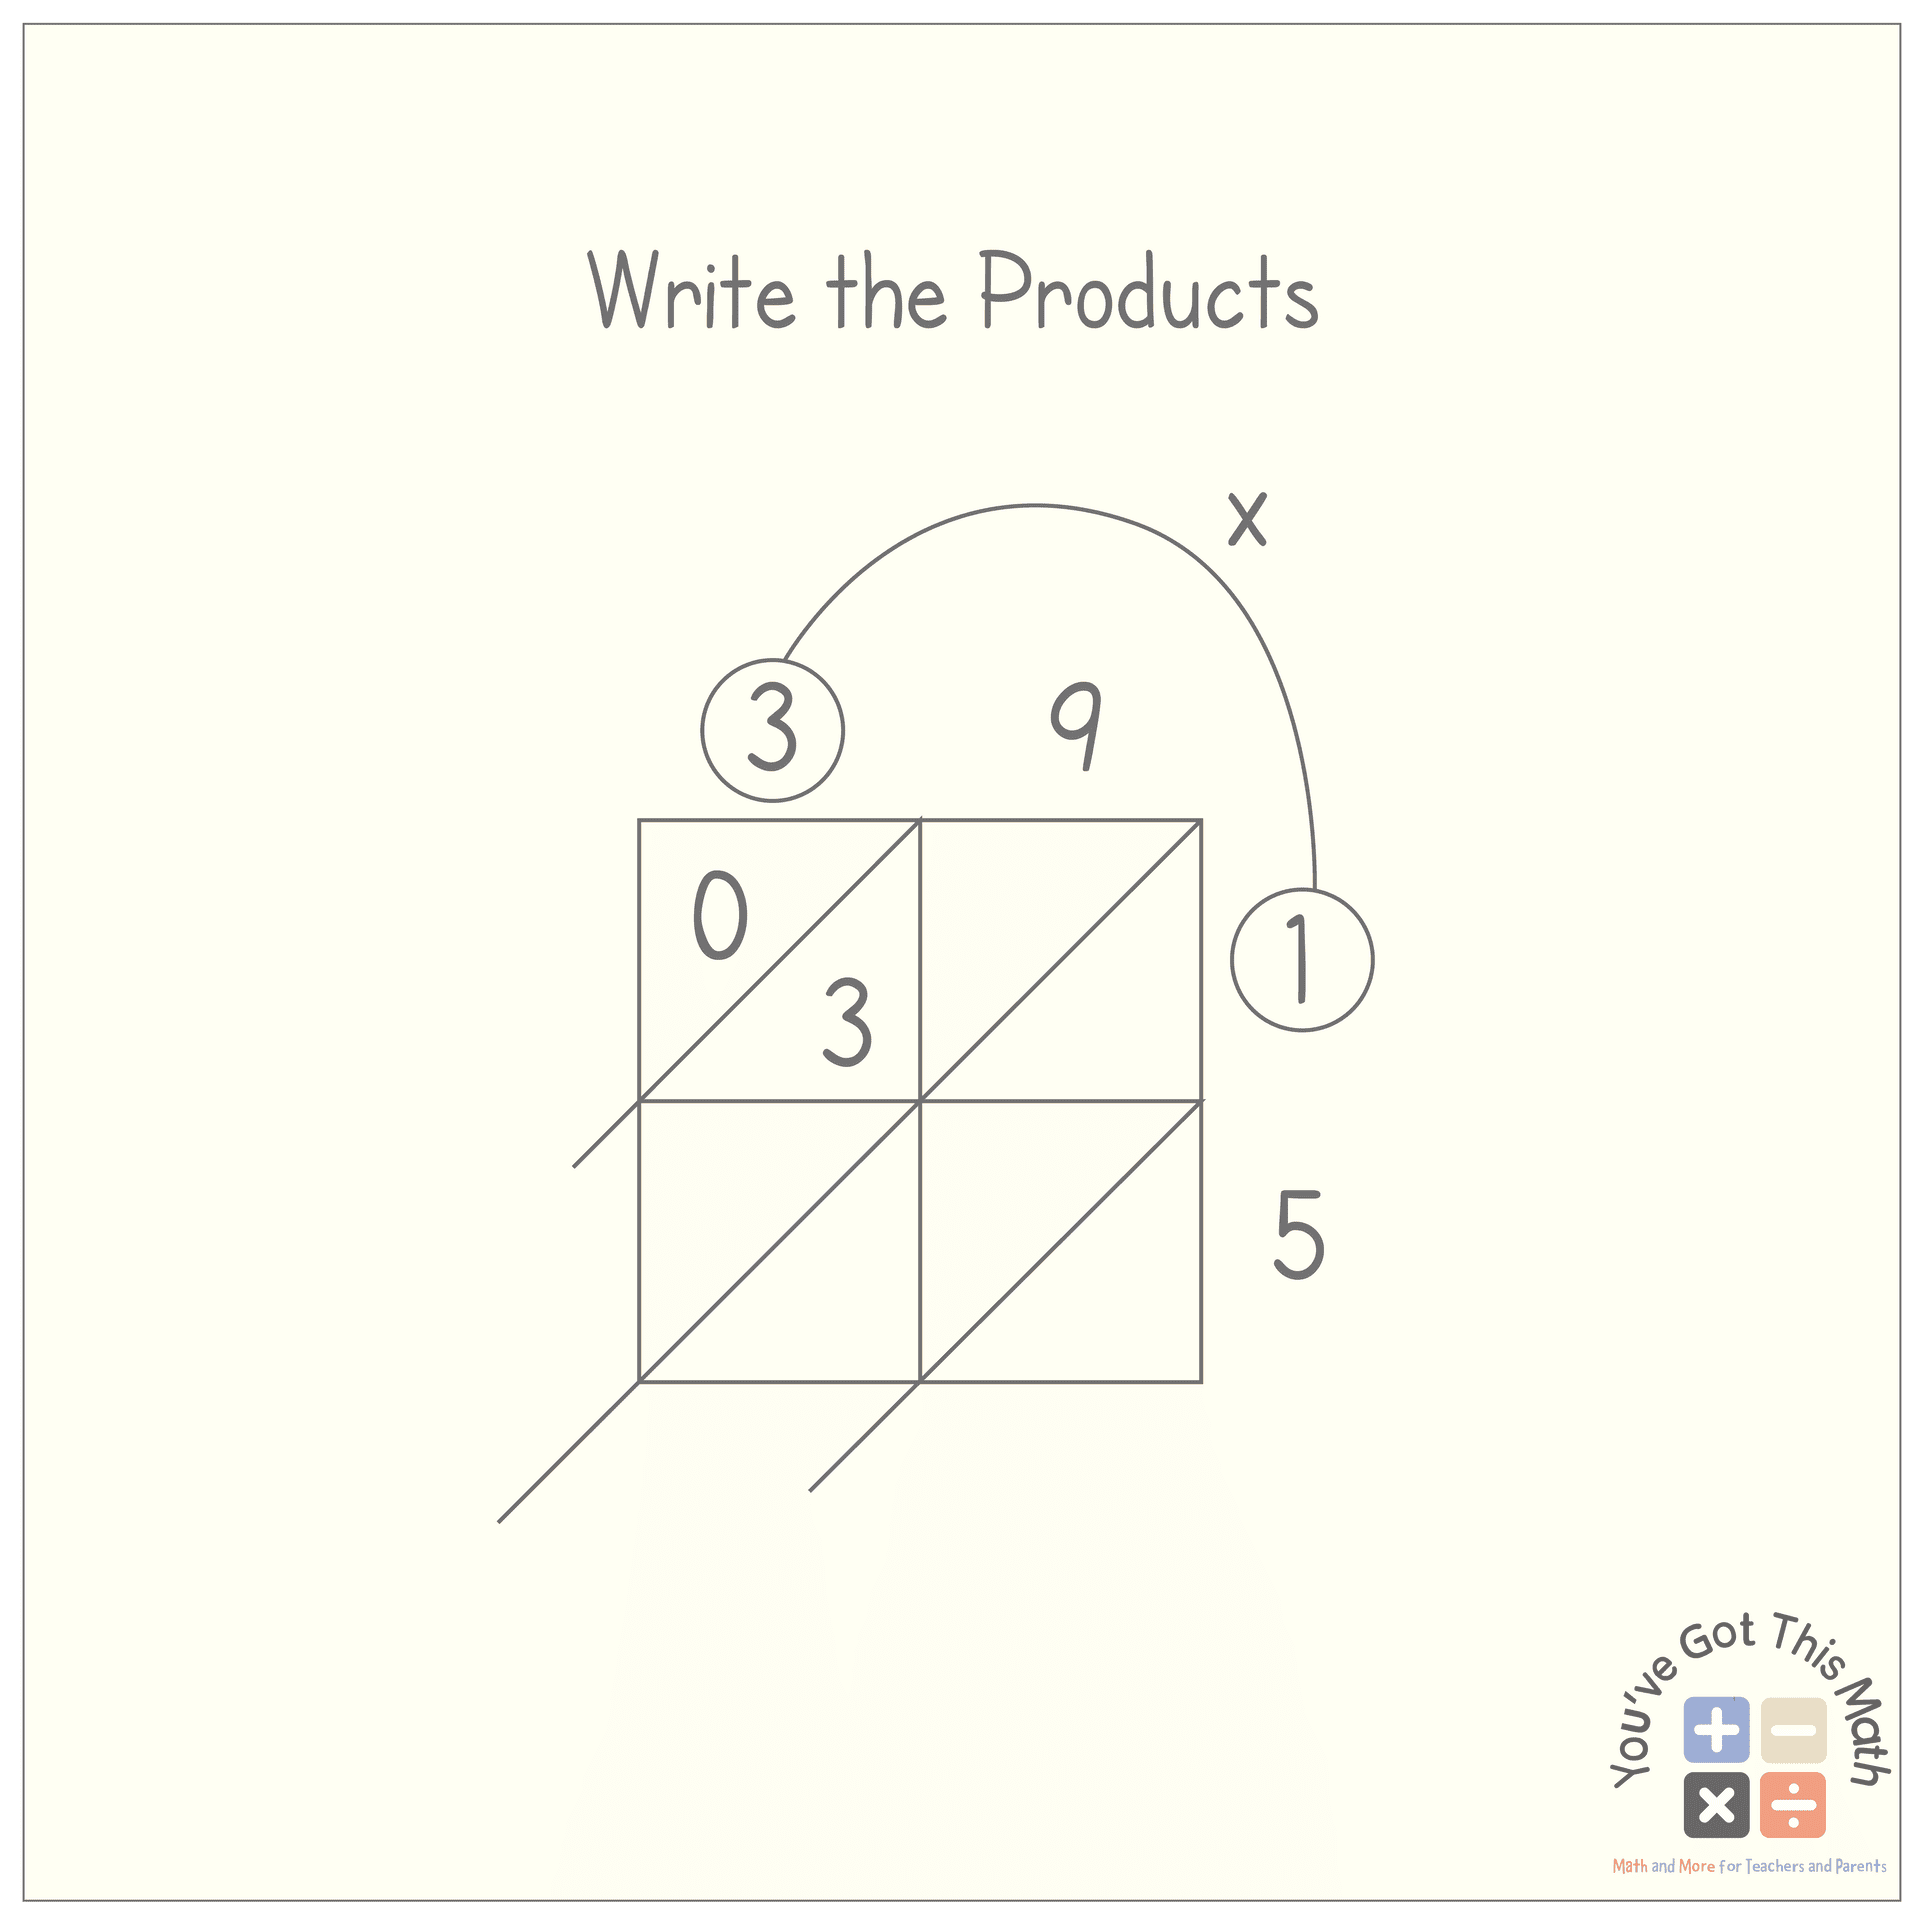 Write the Products